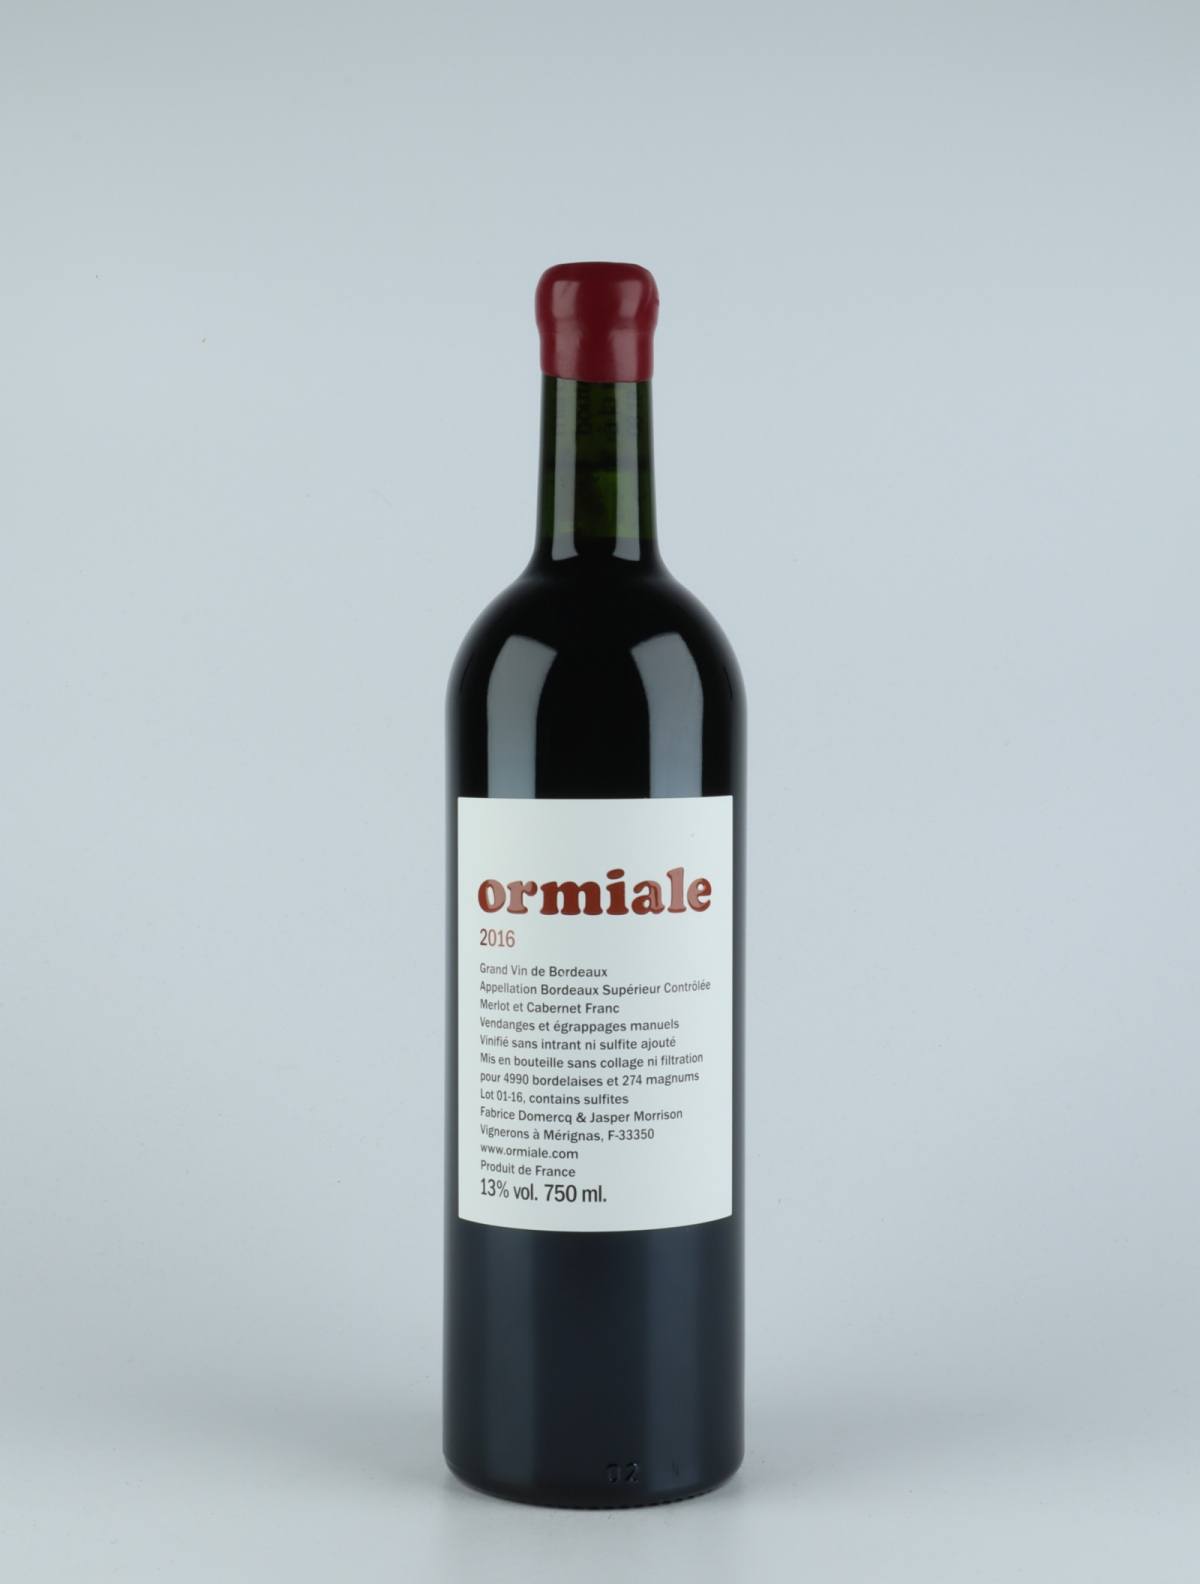 A bottle 2016 Ormiale Red wine from Ormiale, Bordeaux in France